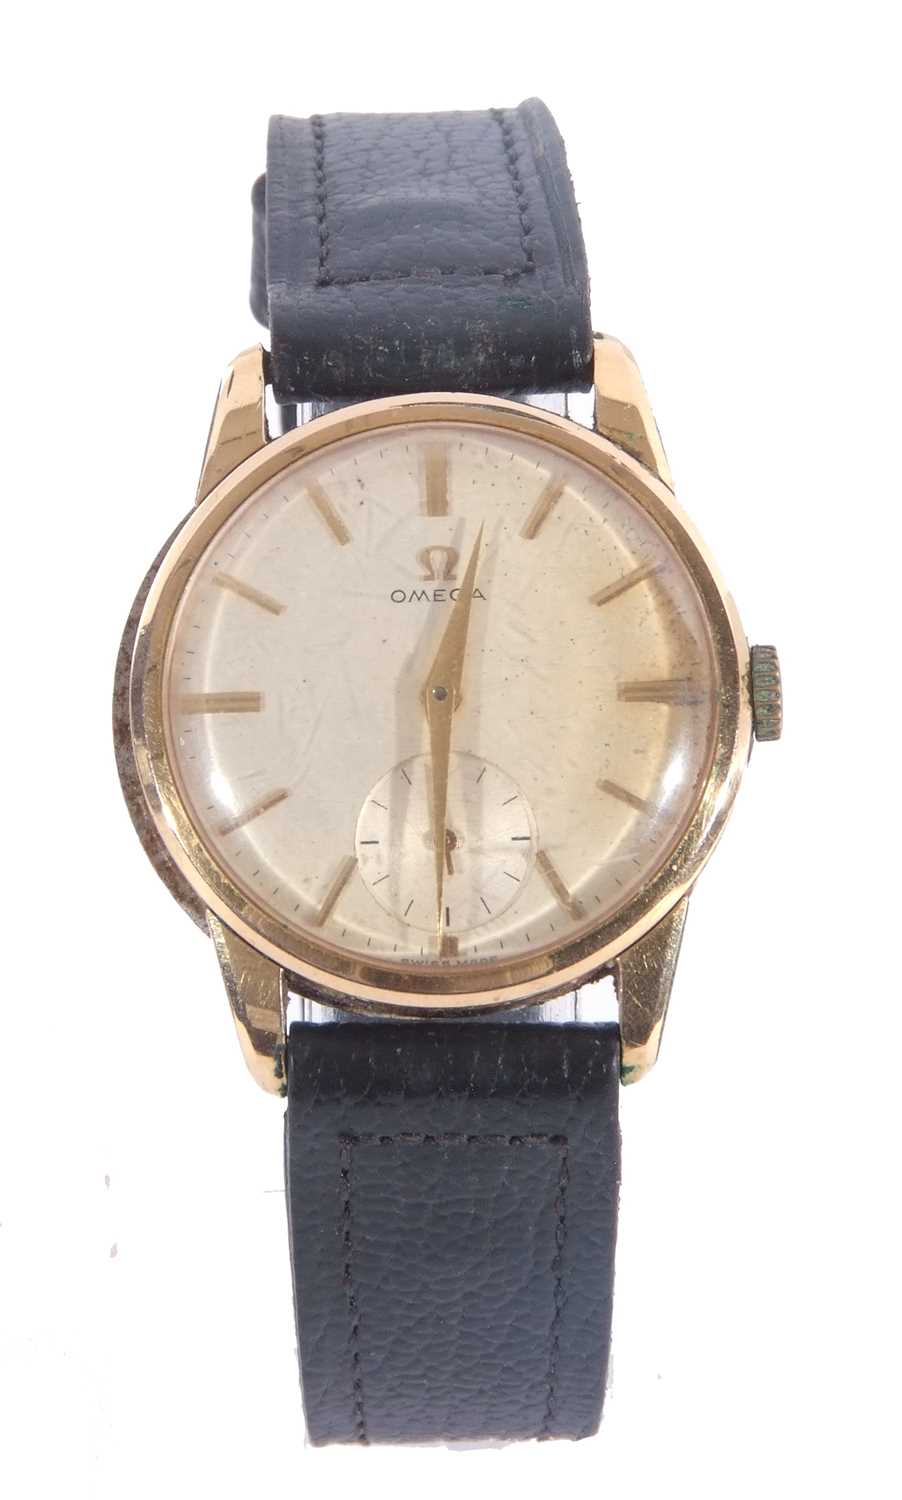 Gents Omega wristwatch with champagne dial and baton hour markers, the dial also features a sub-